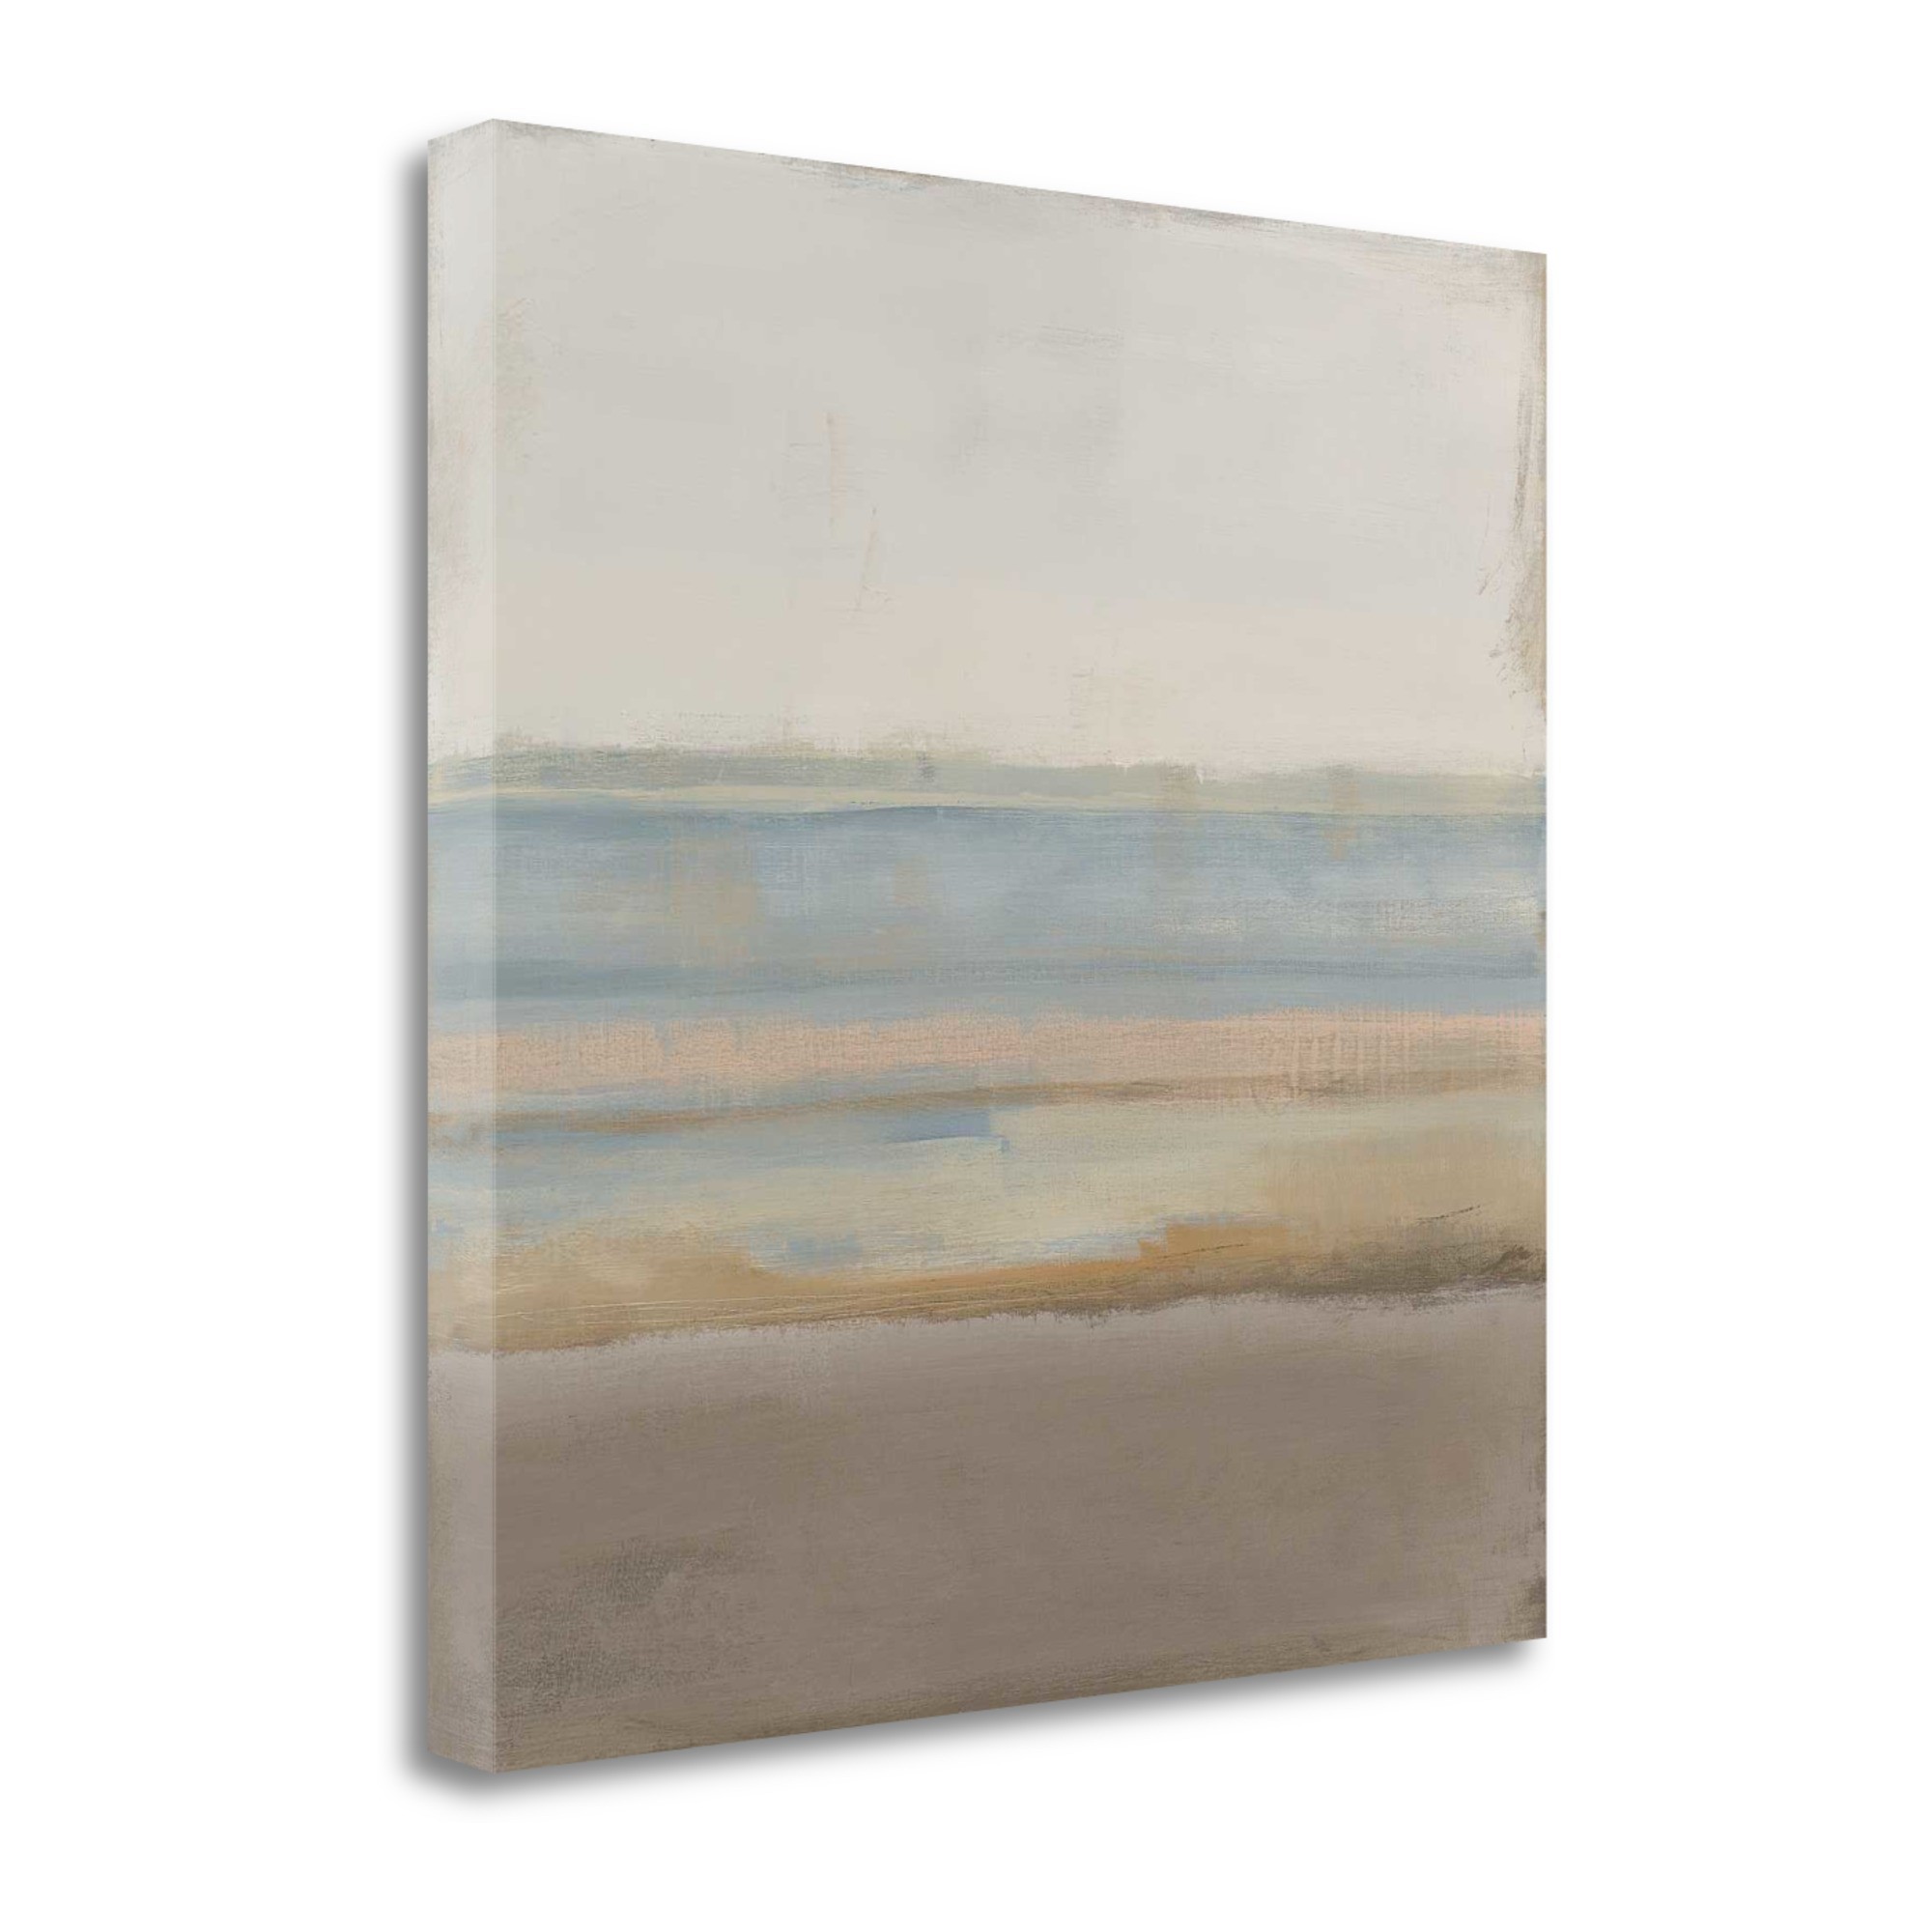 35" Soft Pastel Abstract Beach View Print on Gallery Wrap Canvas Wall Art